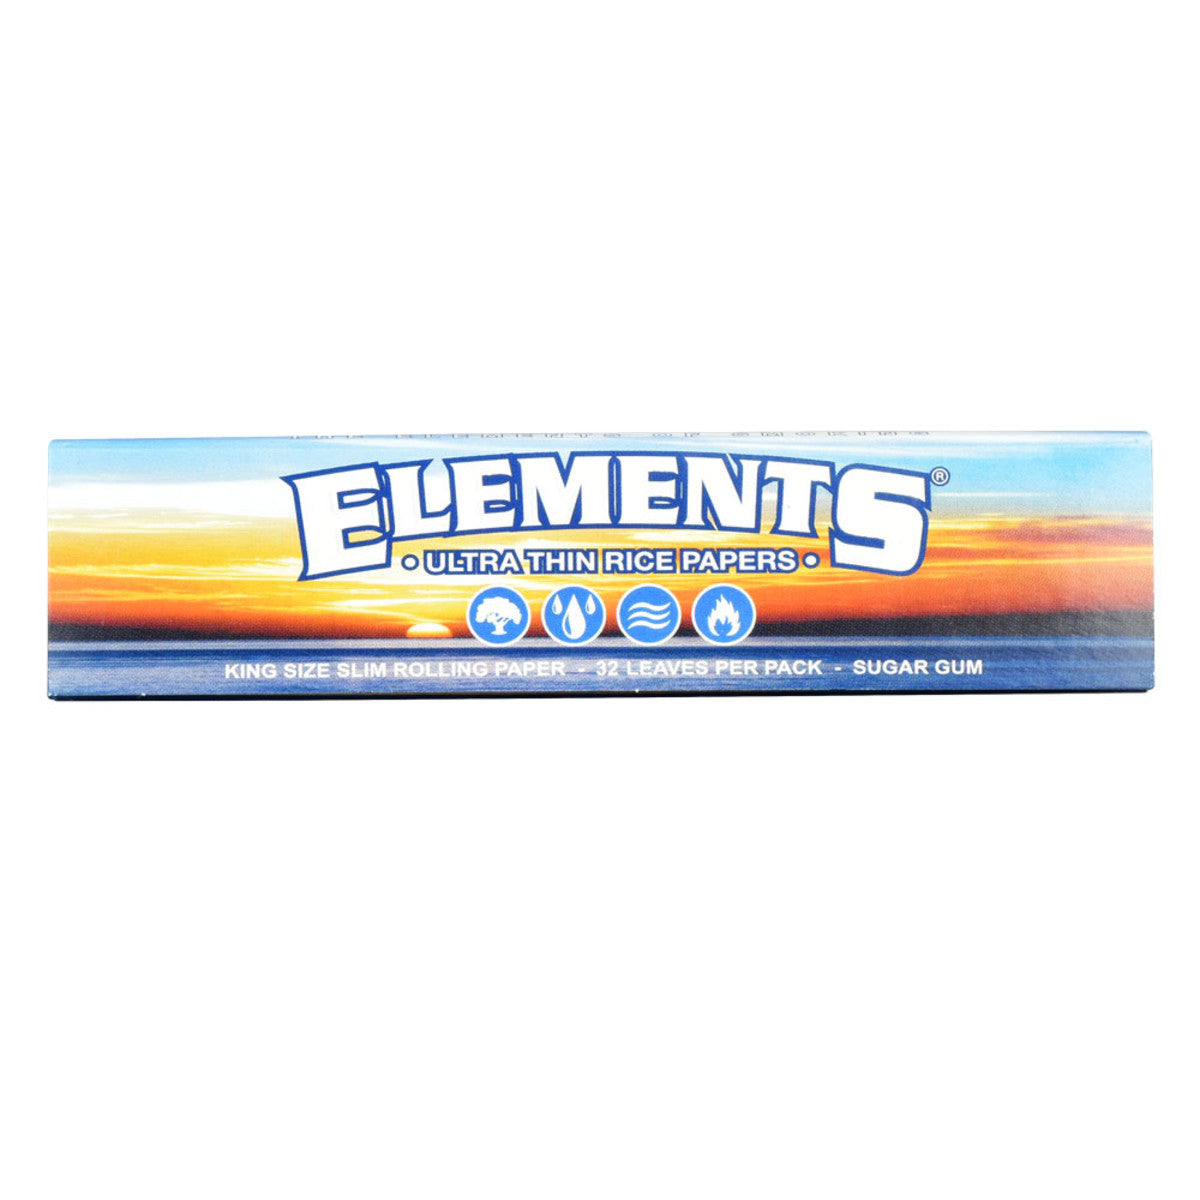 elements ultra thin rice papers king size